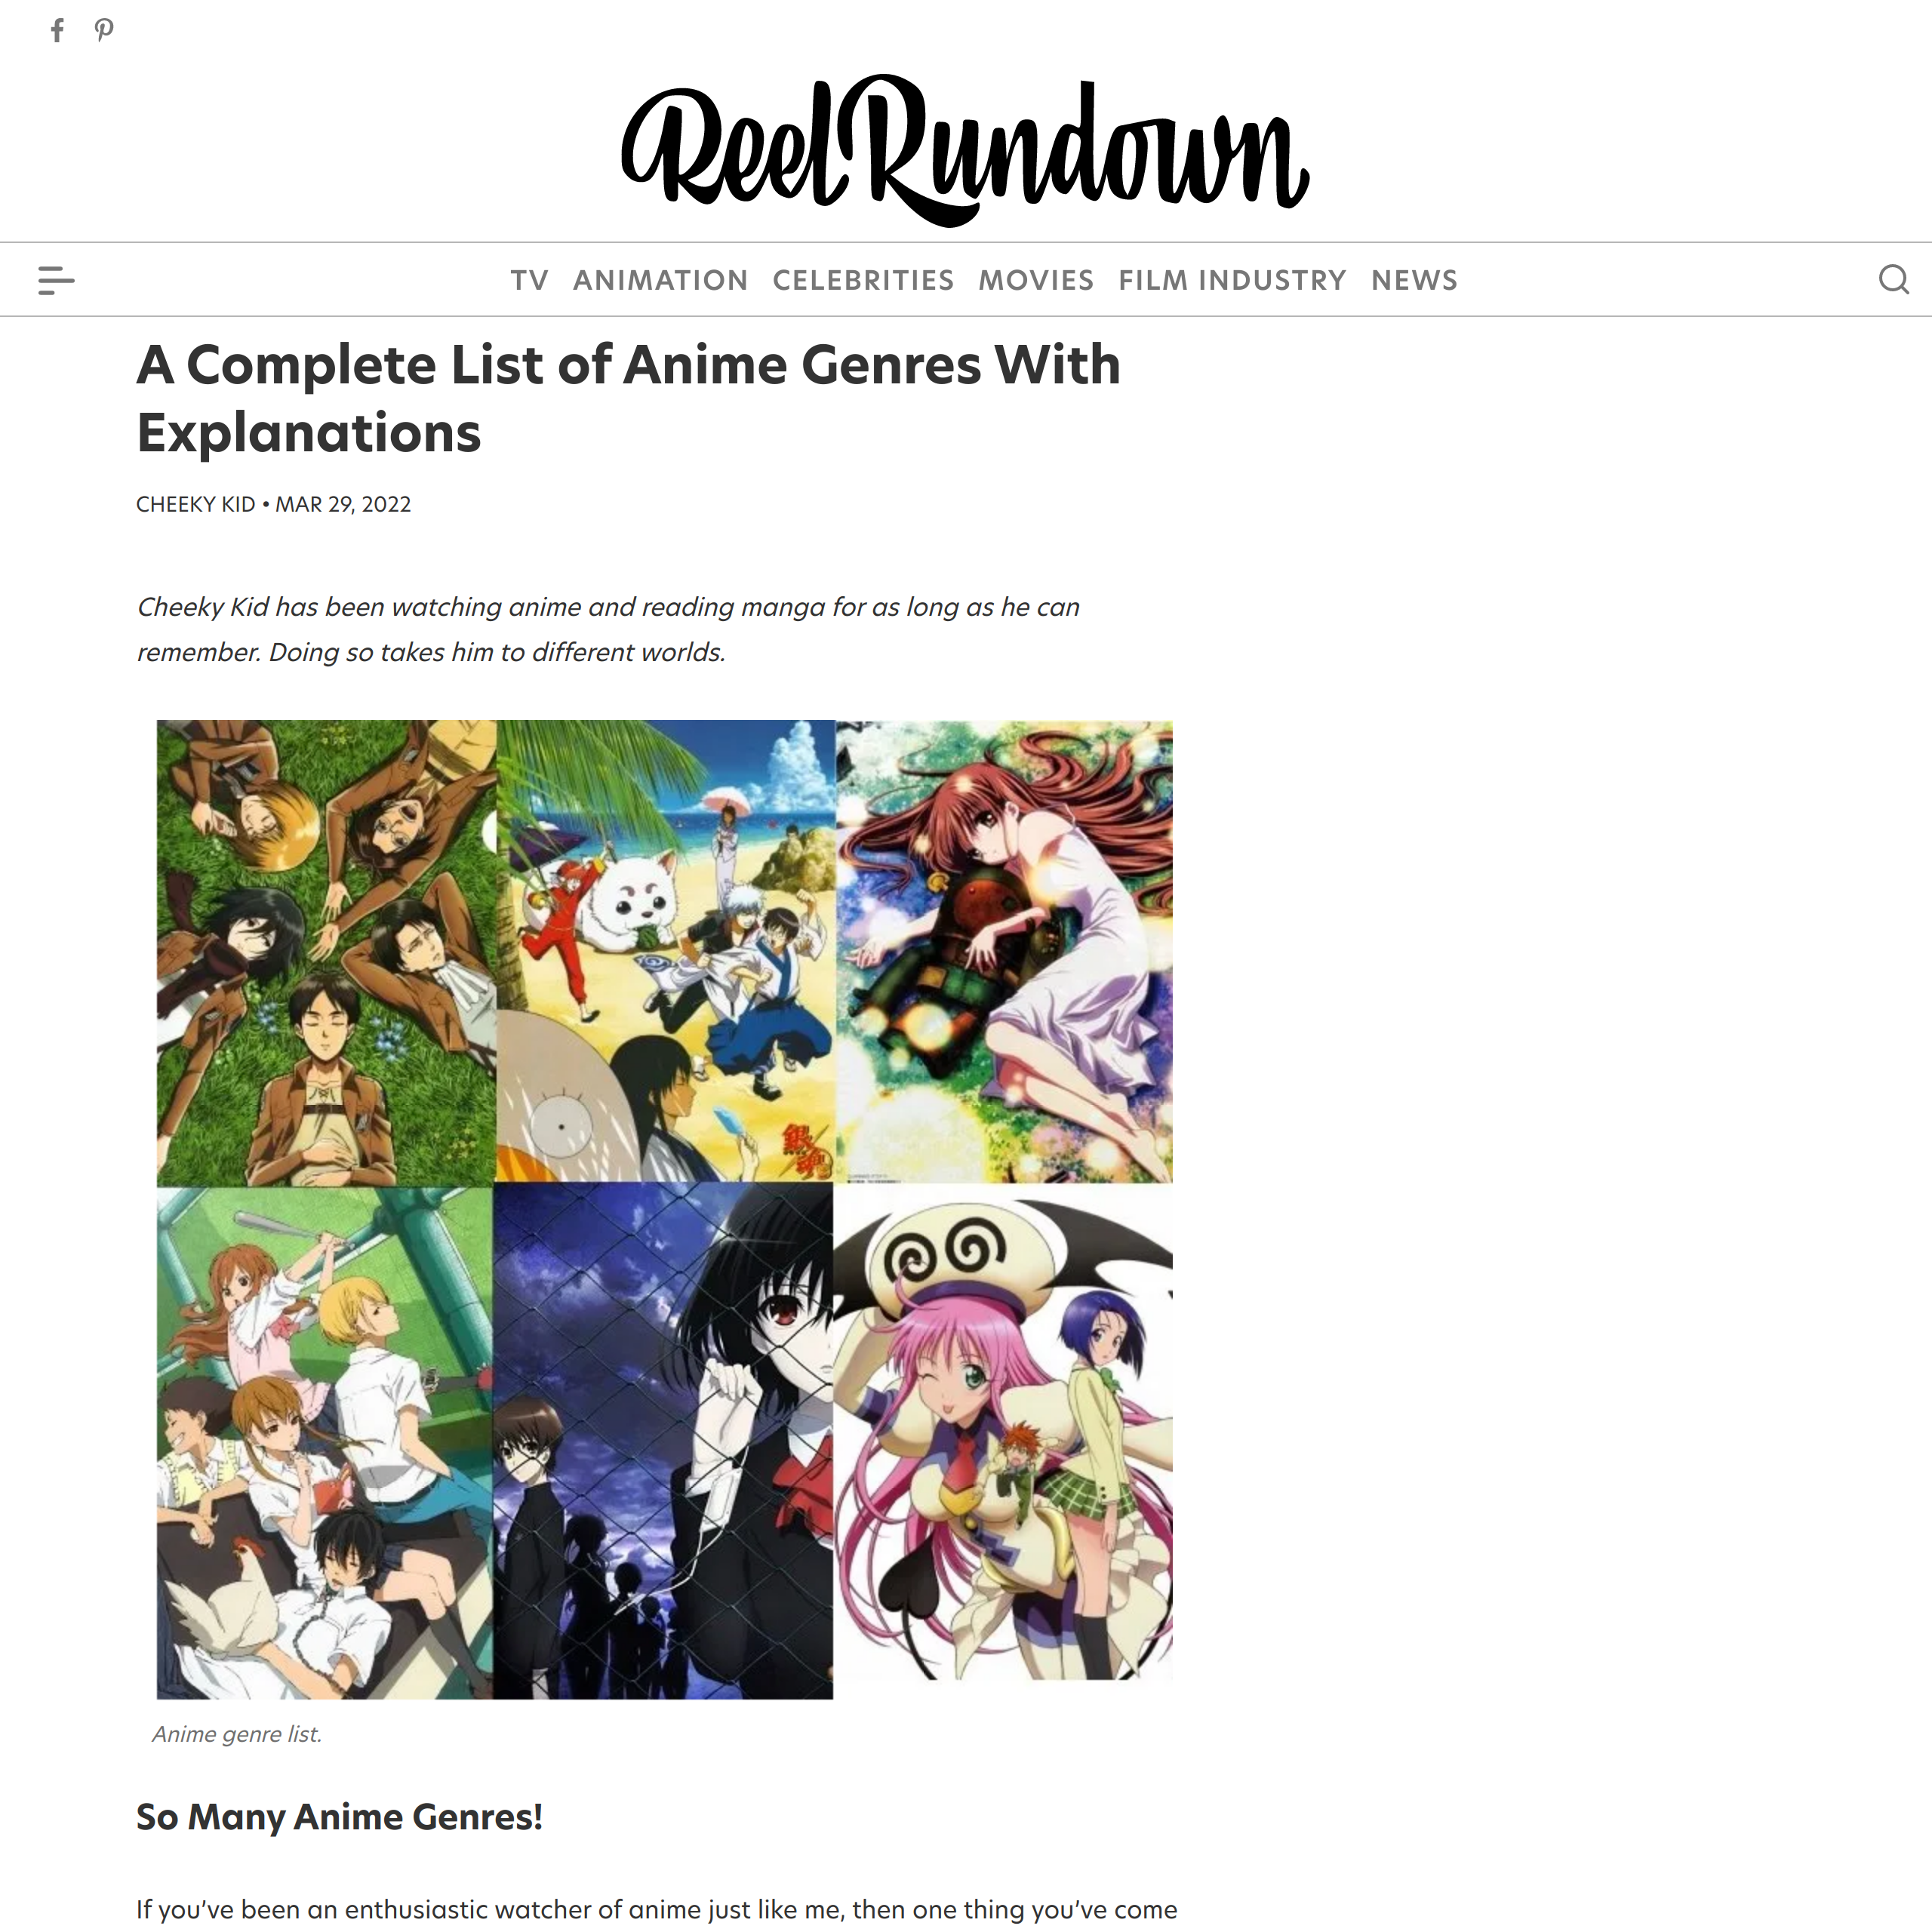 So How Many Anime Genres Are There Anyway?